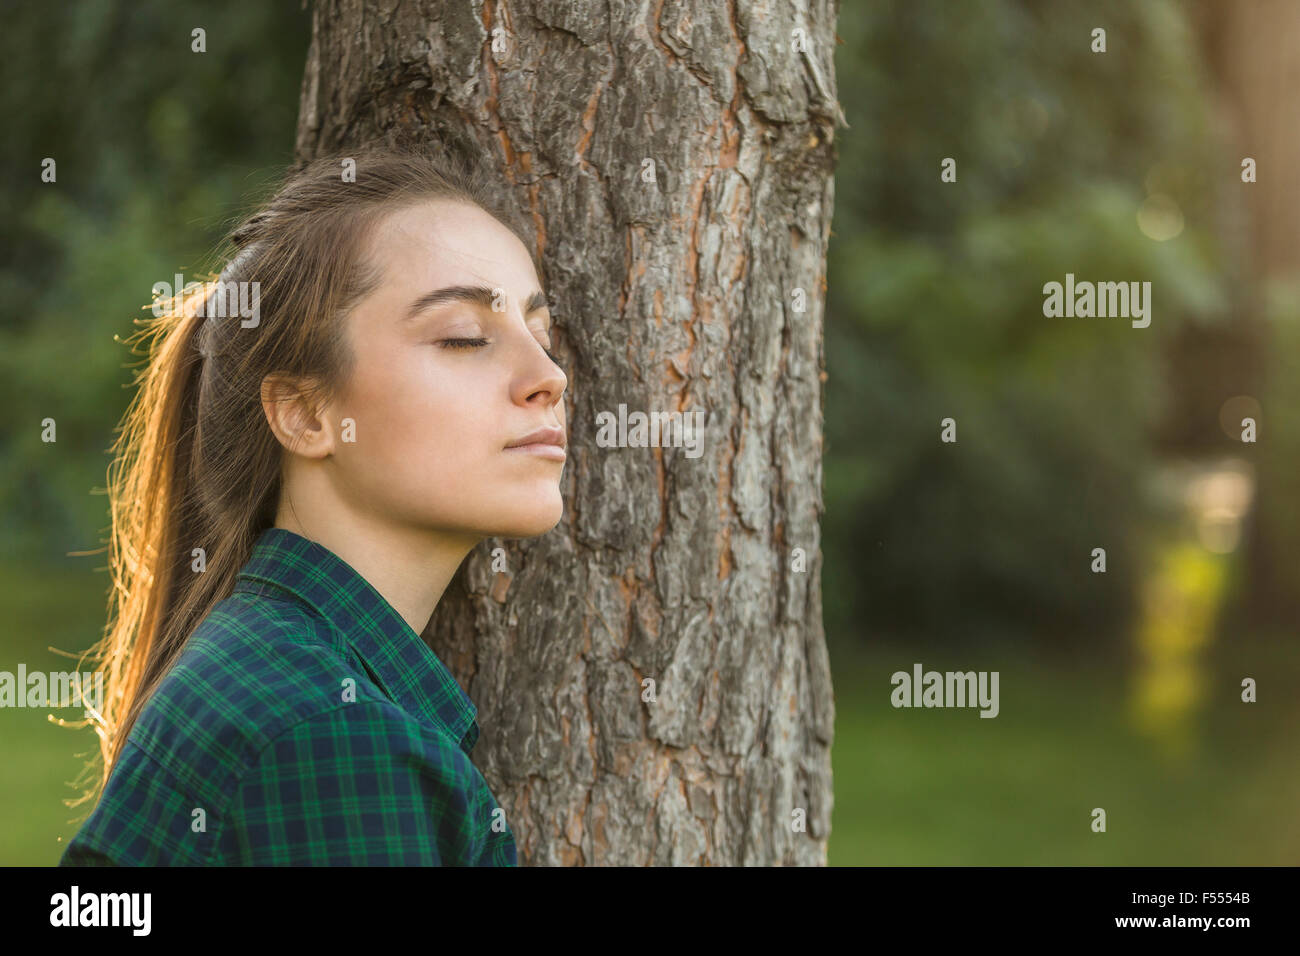 Beautiful woman with eyes closed leaning on tree trunk at park Stock Photo